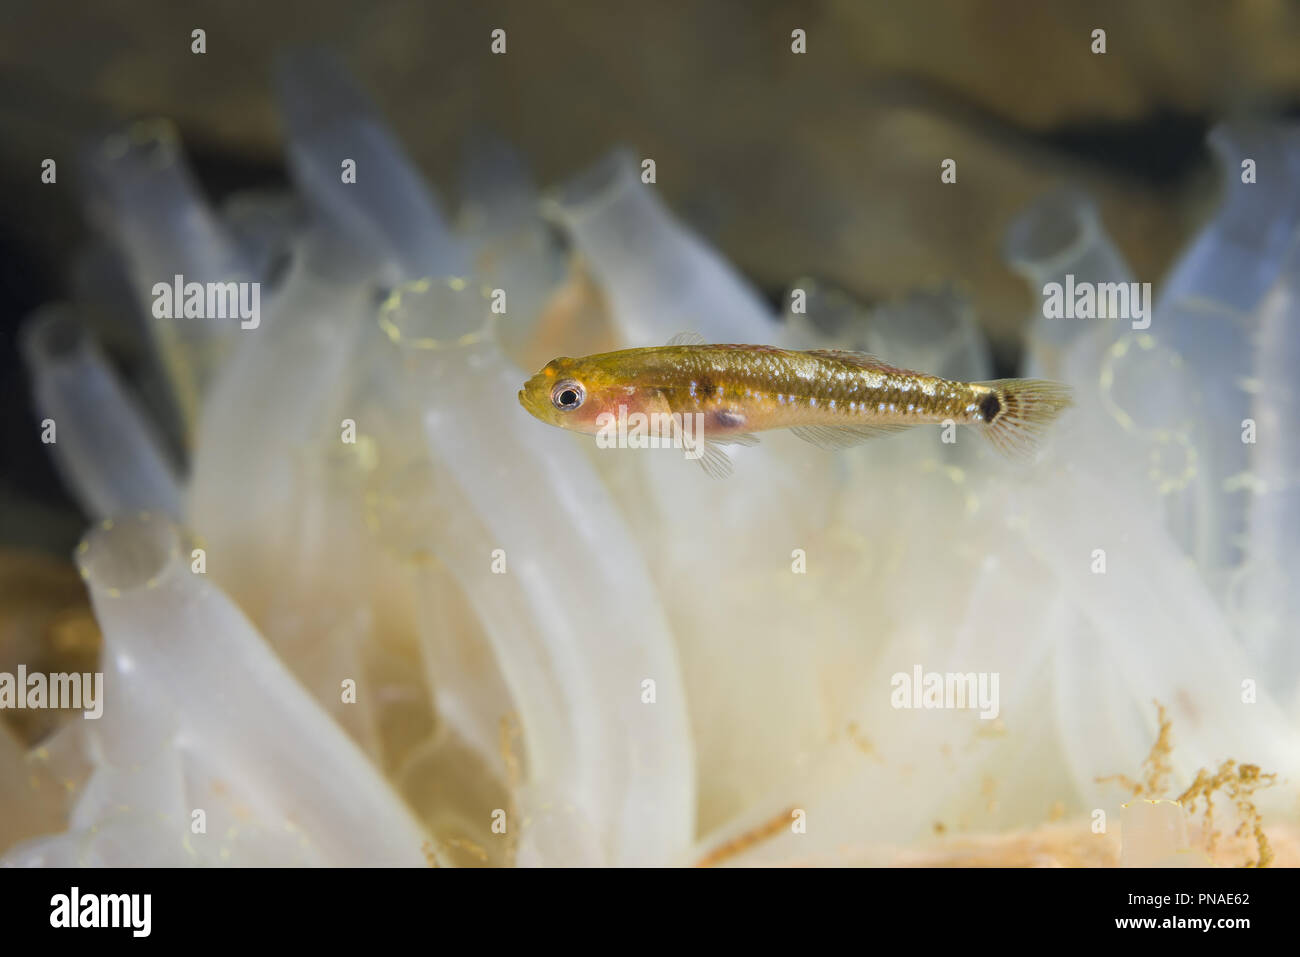 Two spotted Goby (Gobiusculus flavescens) swim over colony of Transparent sea squirt or Yellow Sea Squirt (Ciona intestinalis, Ascidia intestinalis) Stock Photo